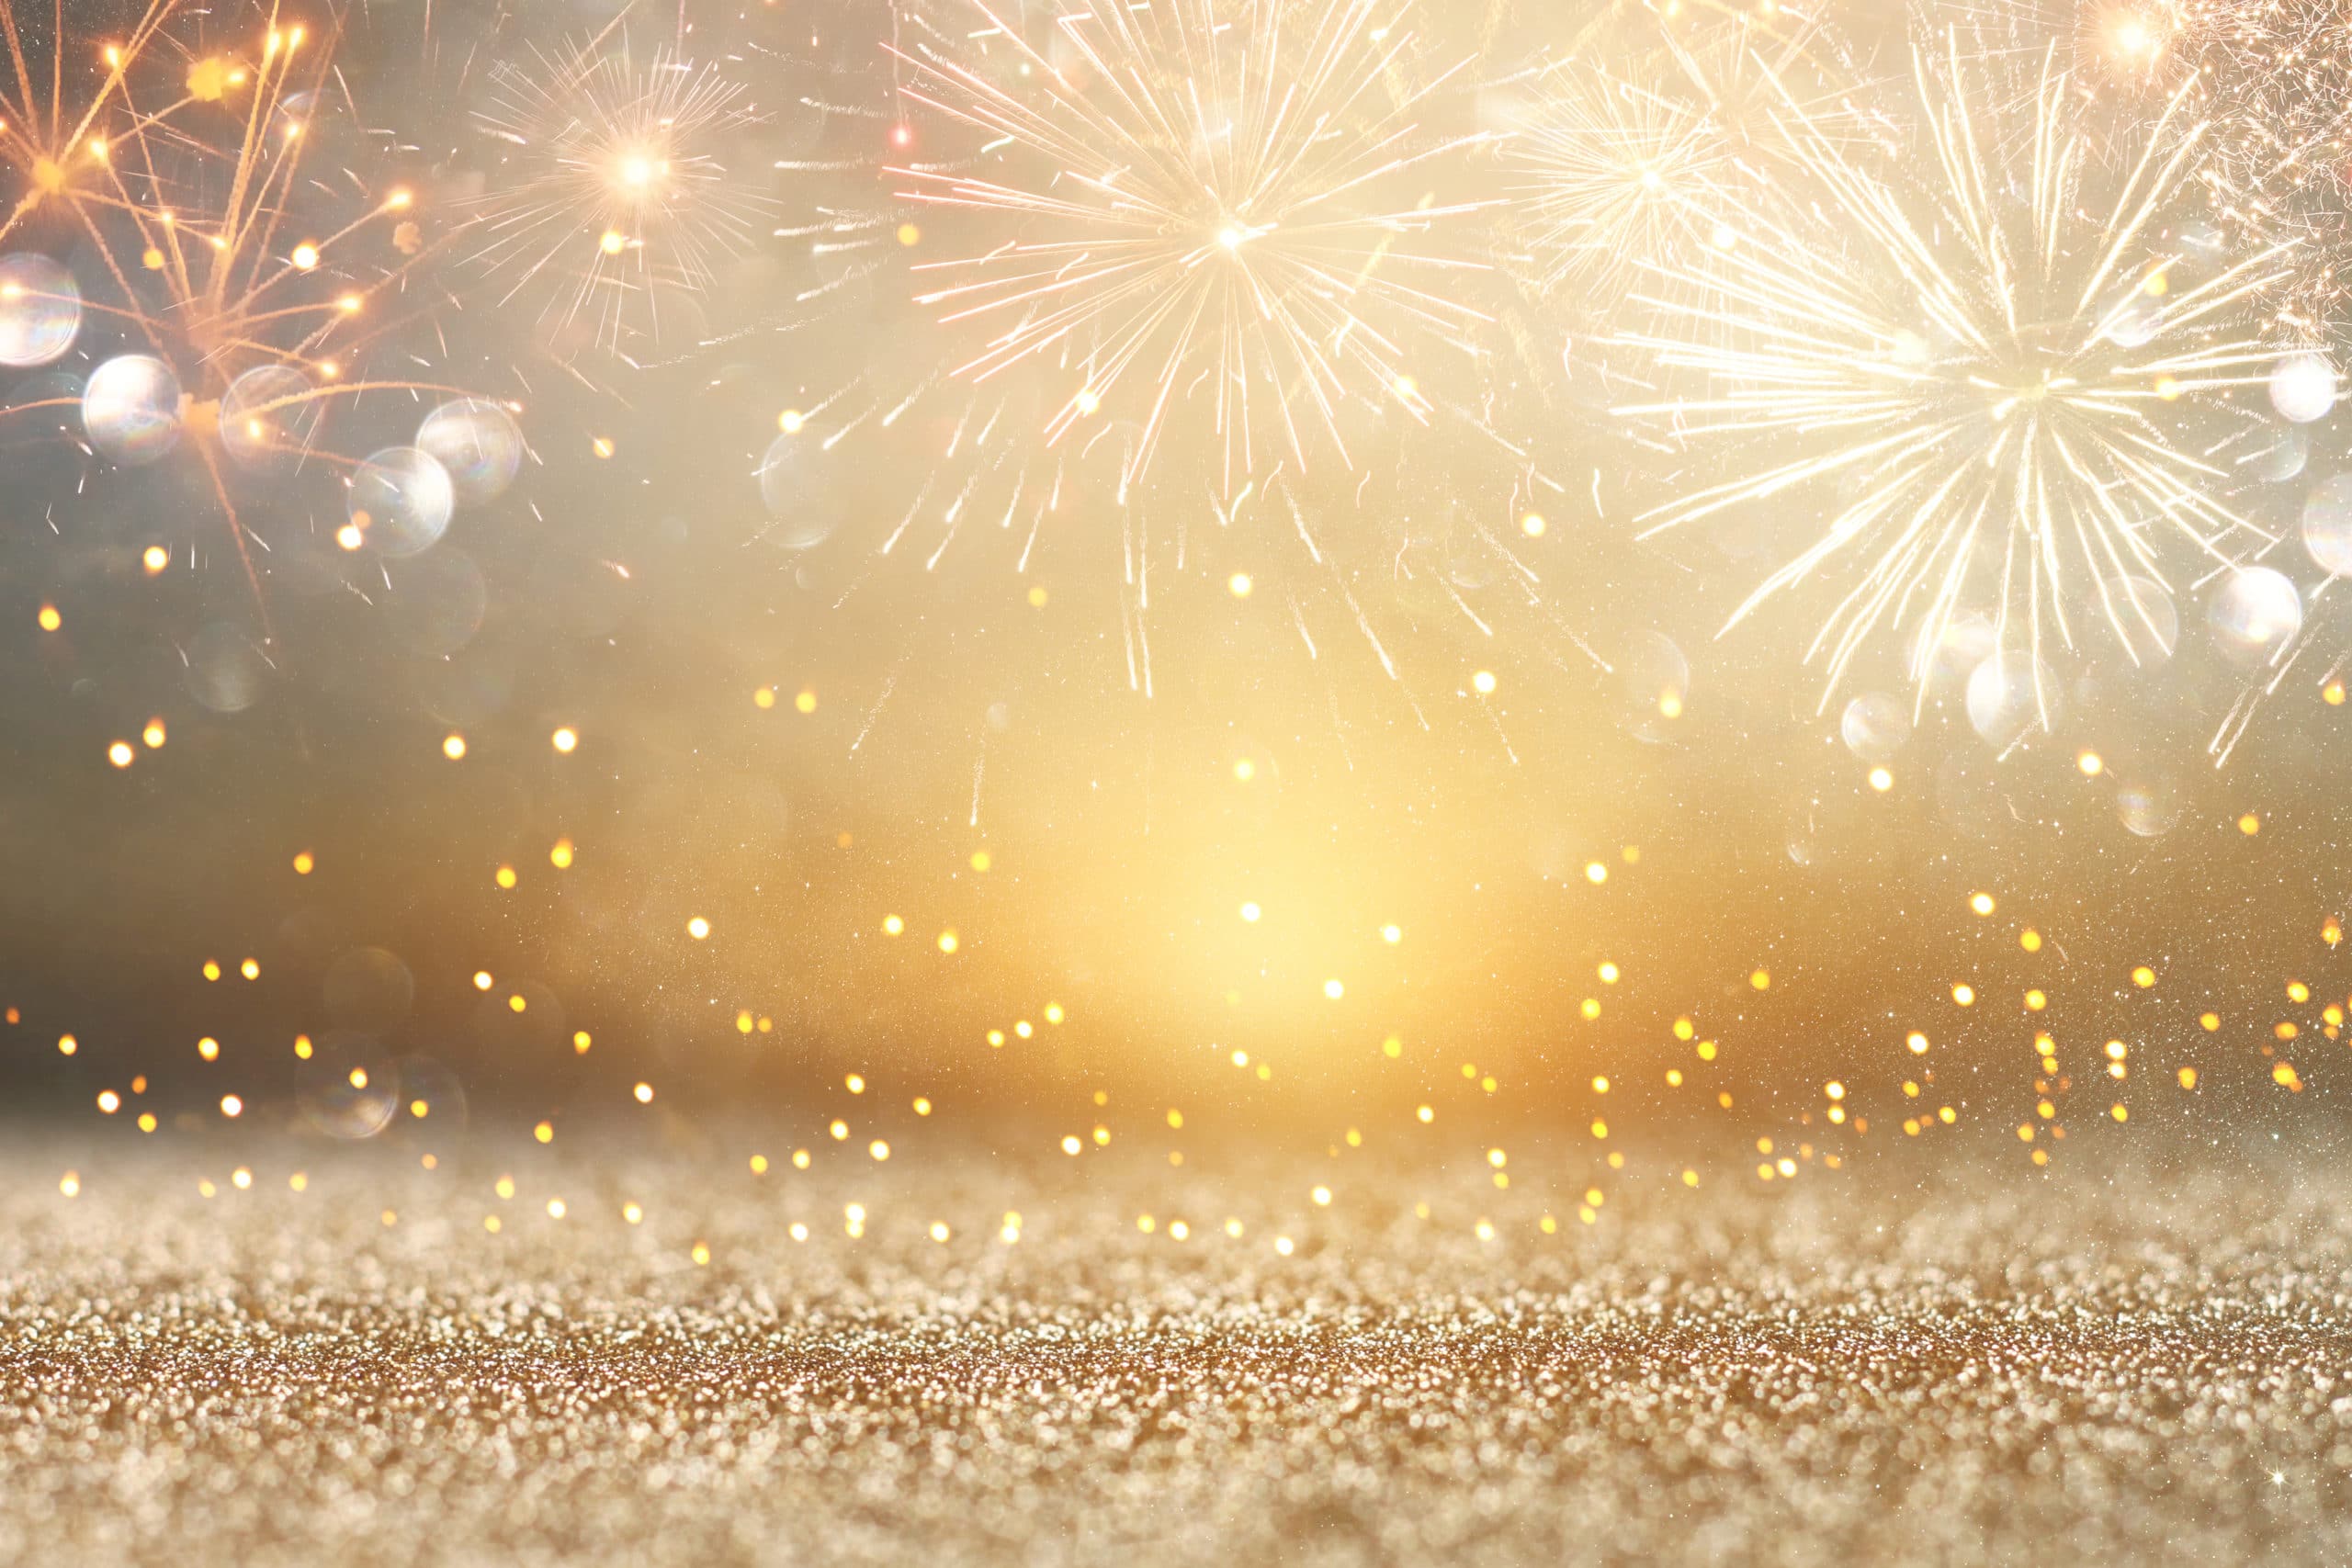 abstract gold glitter background with fireworks